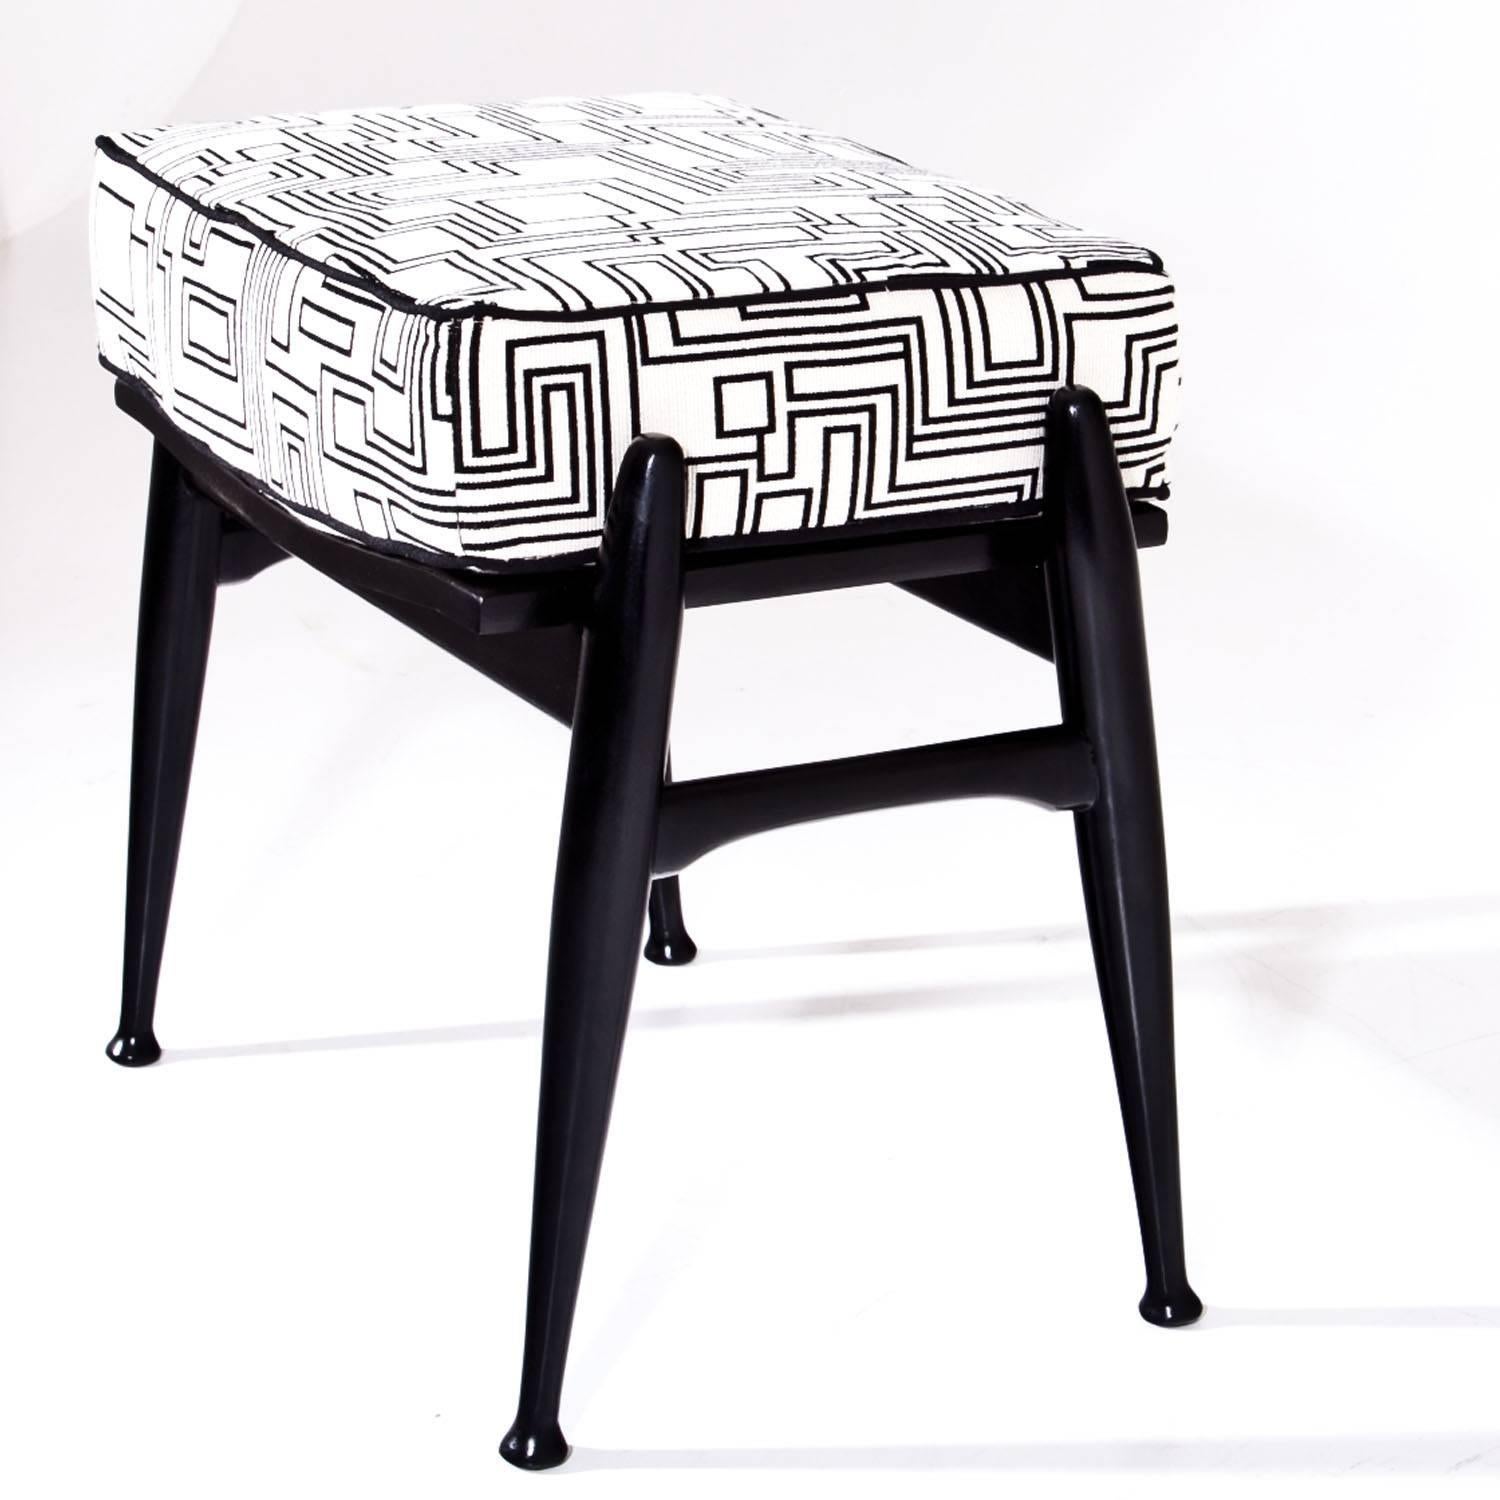 Small stool on ebonized legs with a rectangular cushioned seat. The seat was reupholstered with a high quality fabric by designer Eley Kishimoto.